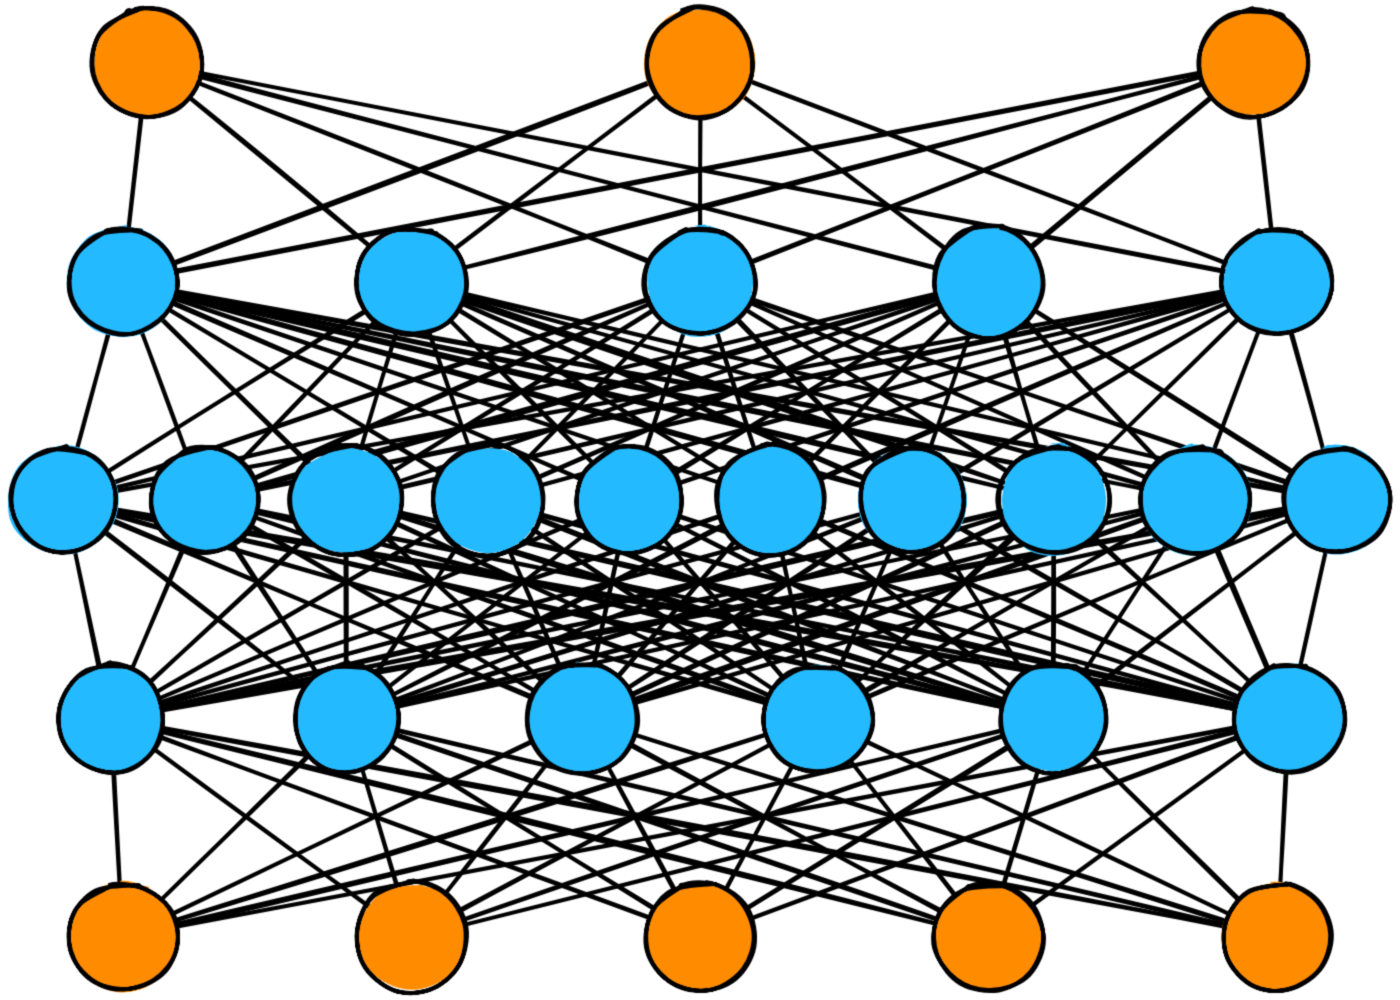 A complicated Neural Network